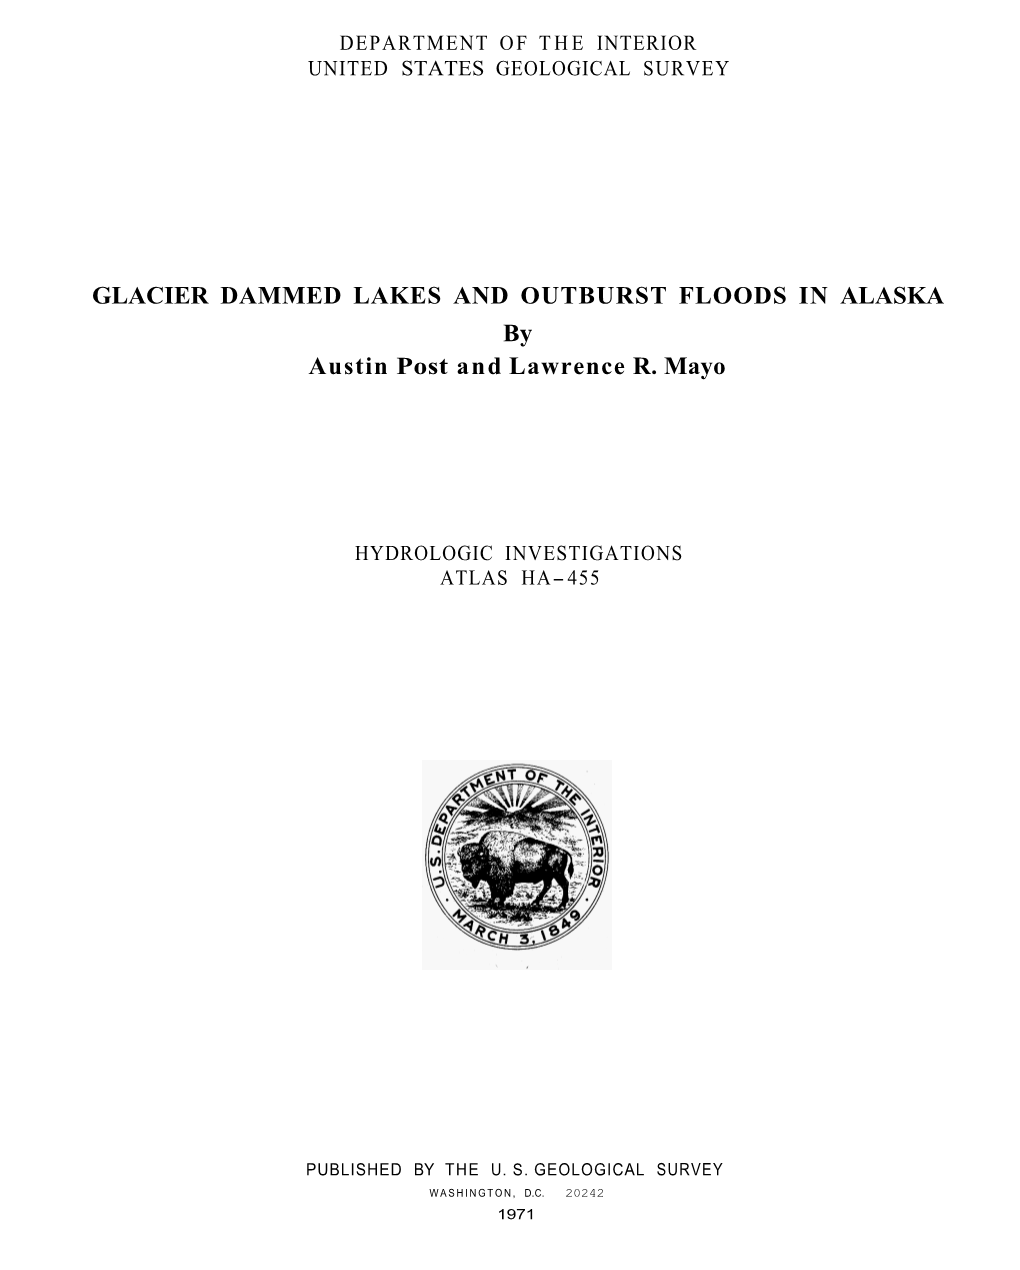 GLACIER DAMMED LAKES and OUTBURST FLOODS in ALASKA by Austin Post and Lawrence R